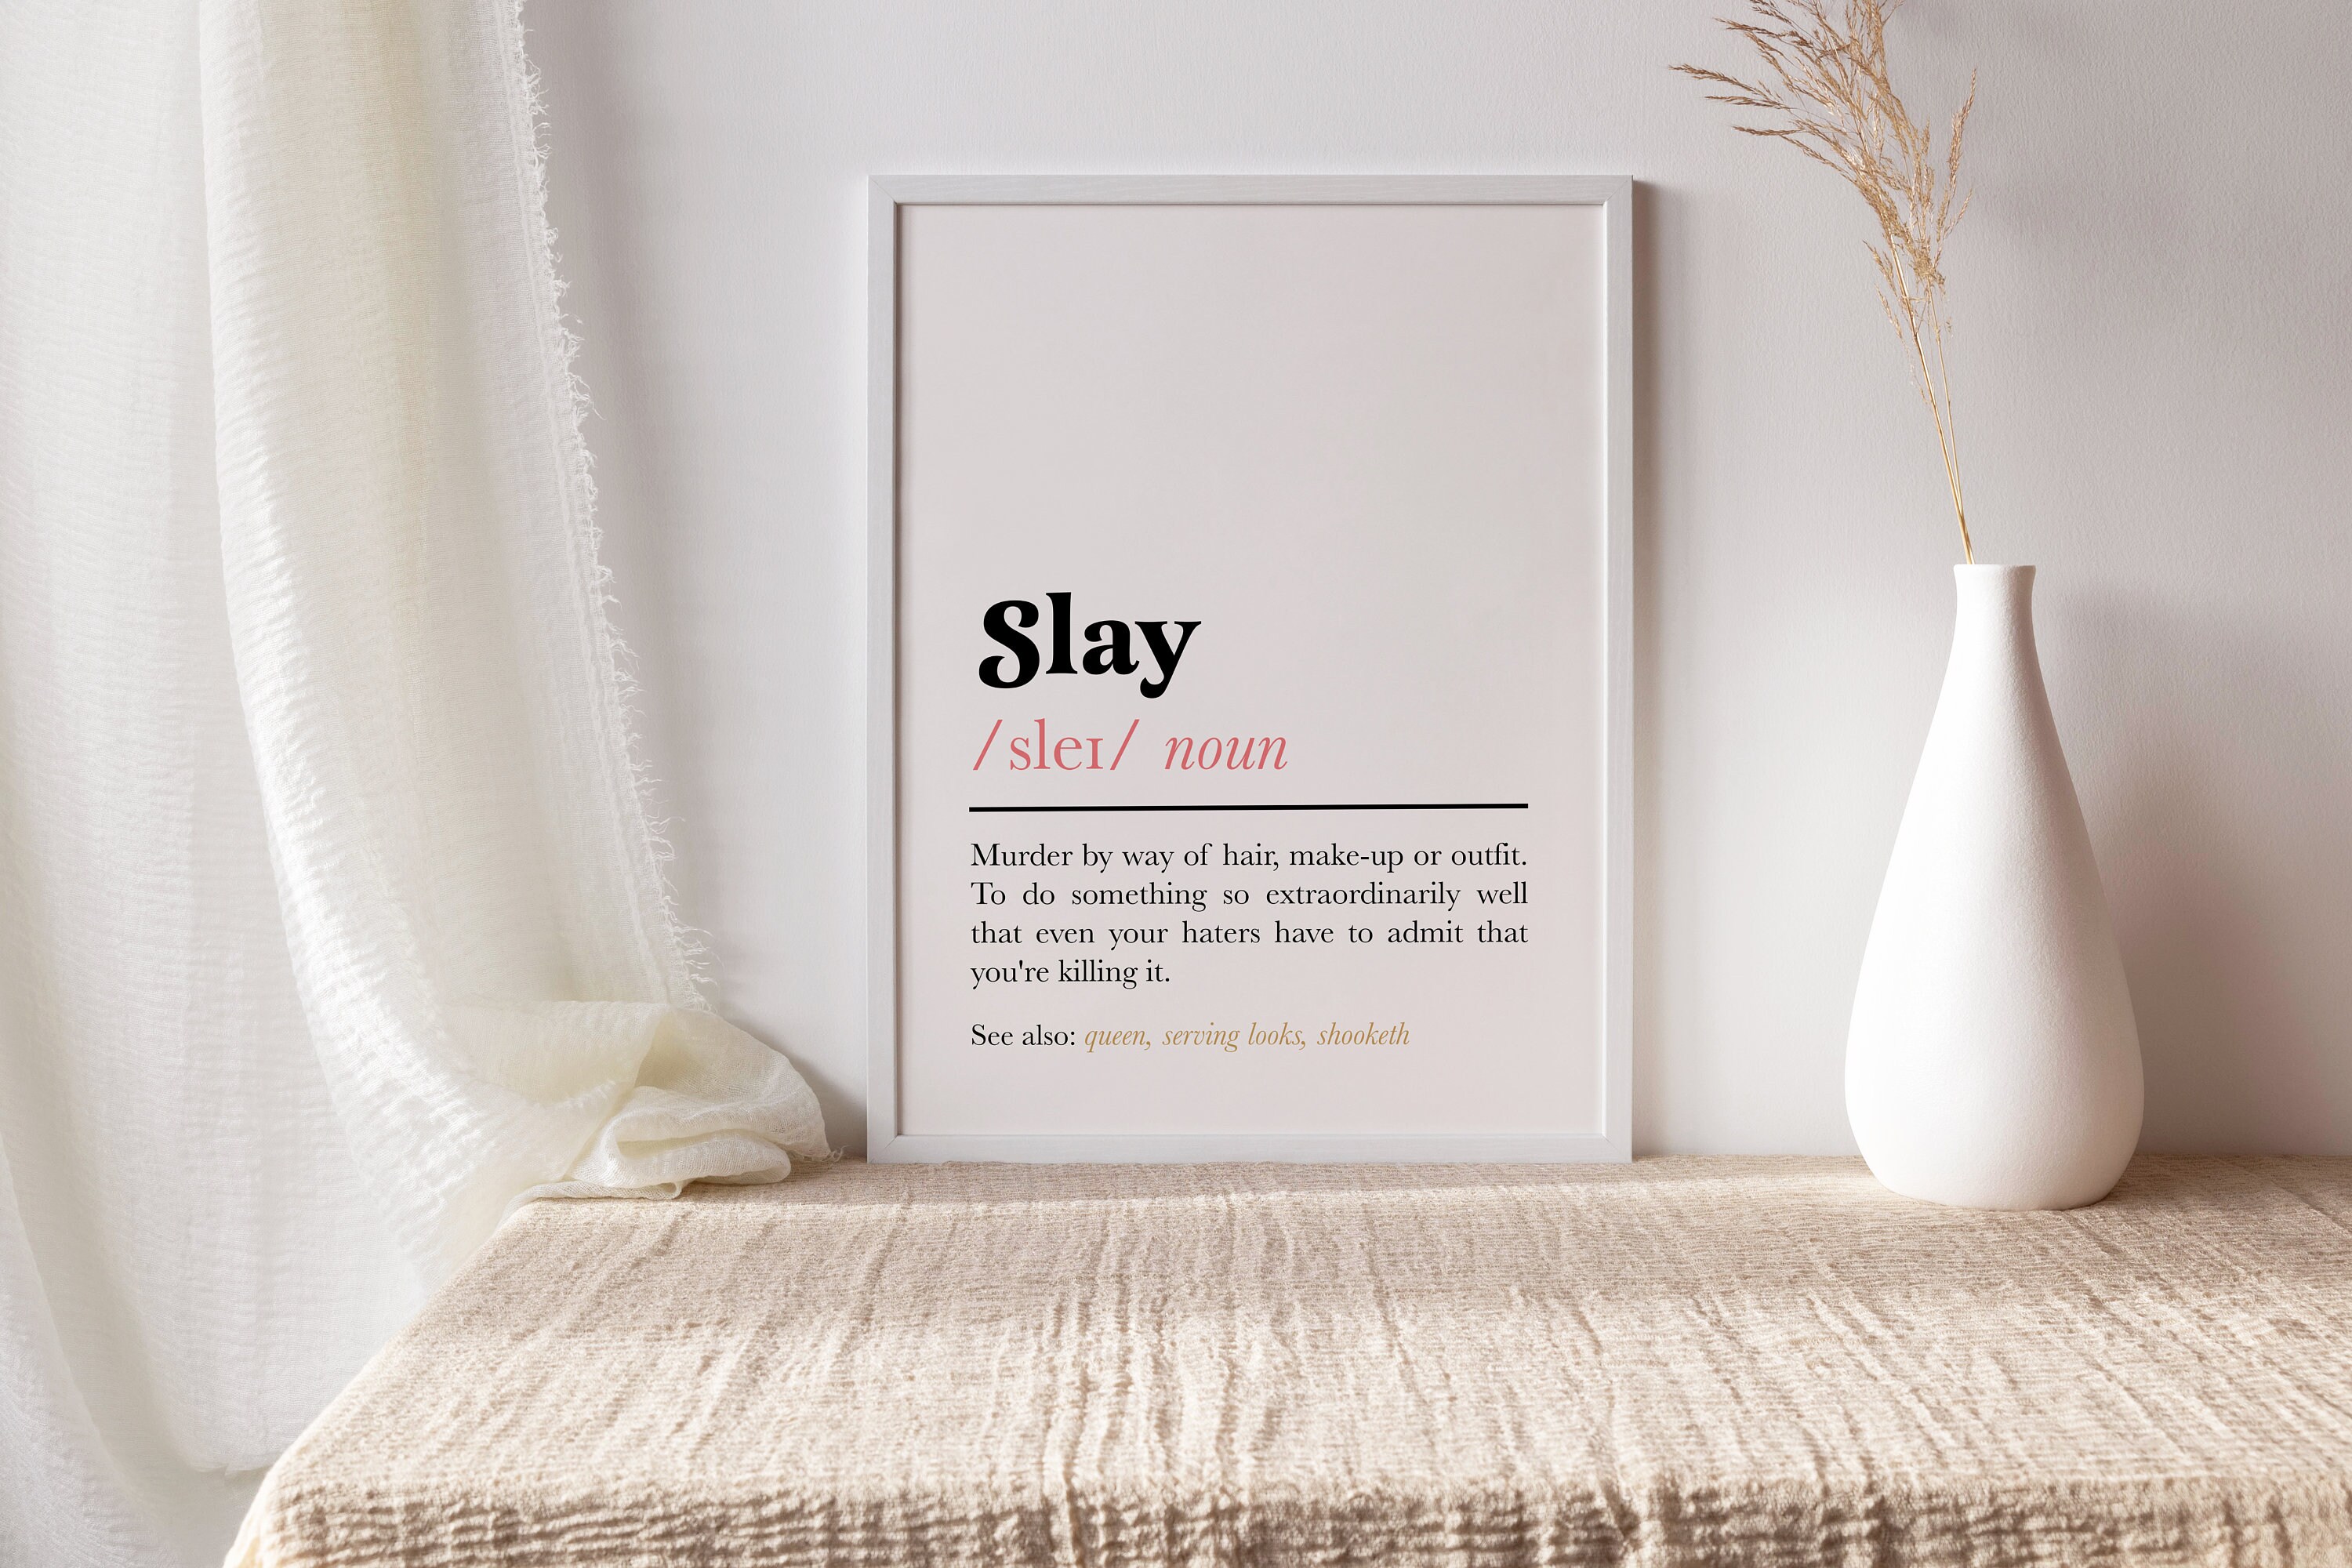 Slay Definition Quote Print Feminist Wall Art Funny -  Finland